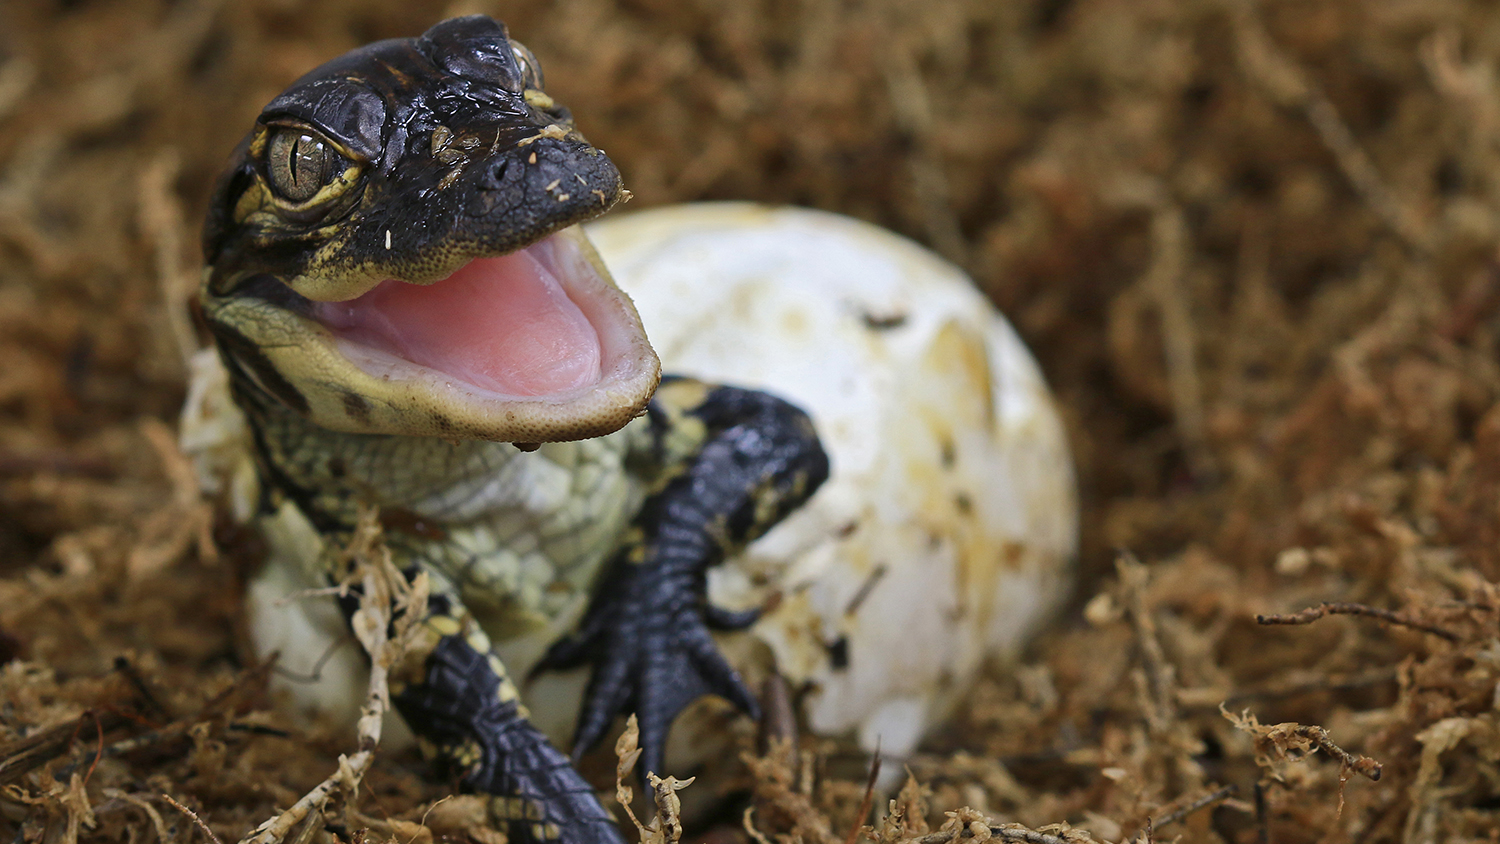 baby alligator hatching out of its egg